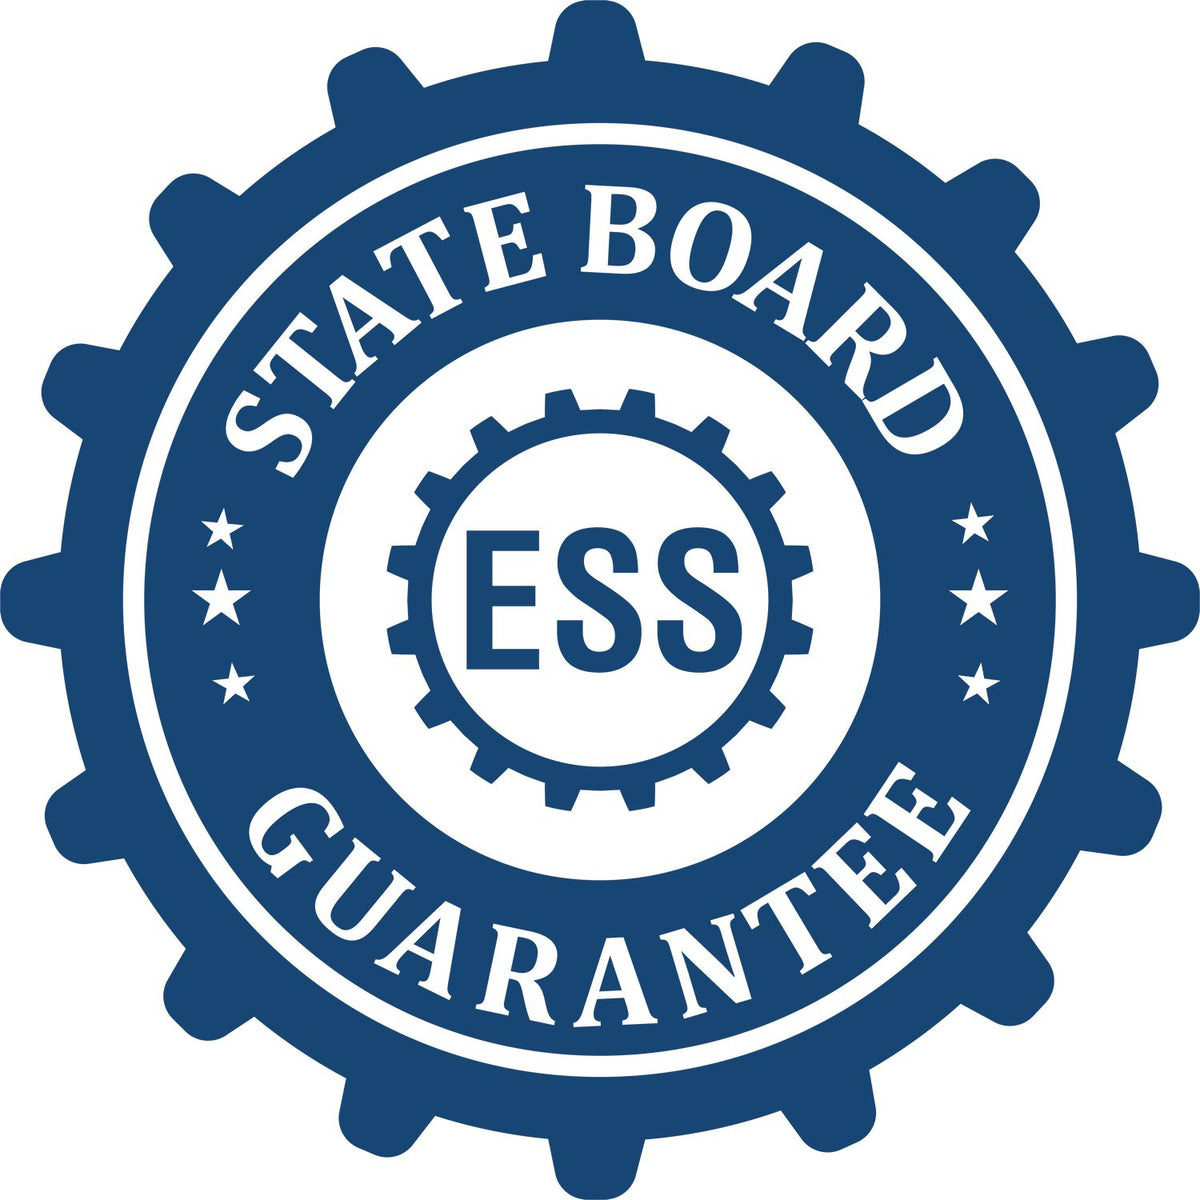 An emblem in a gear shape illustrating a state board guarantee for the Heavy-Duty North Dakota Rectangular Notary Stamp product.